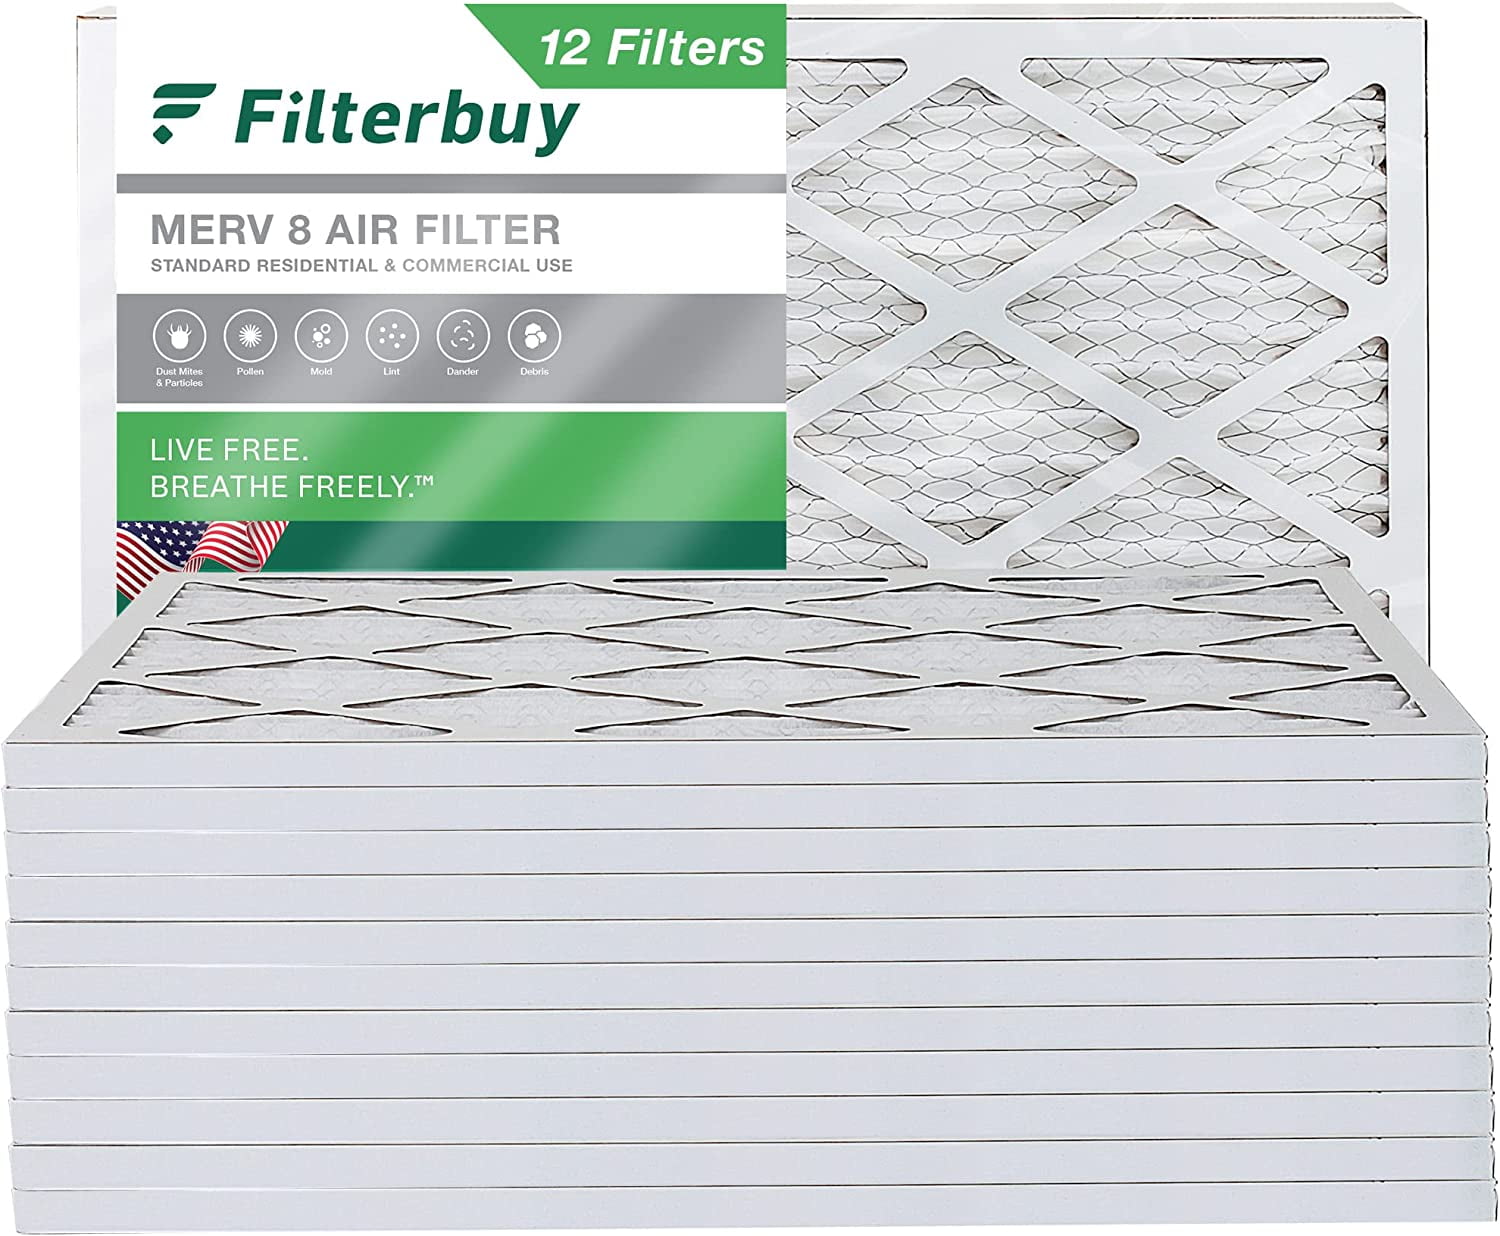 12x20x1 GLASFLOSS HIGH EFFICIENCY MERV 8 PLEATED FURNACE FILTERS 12 PACK 